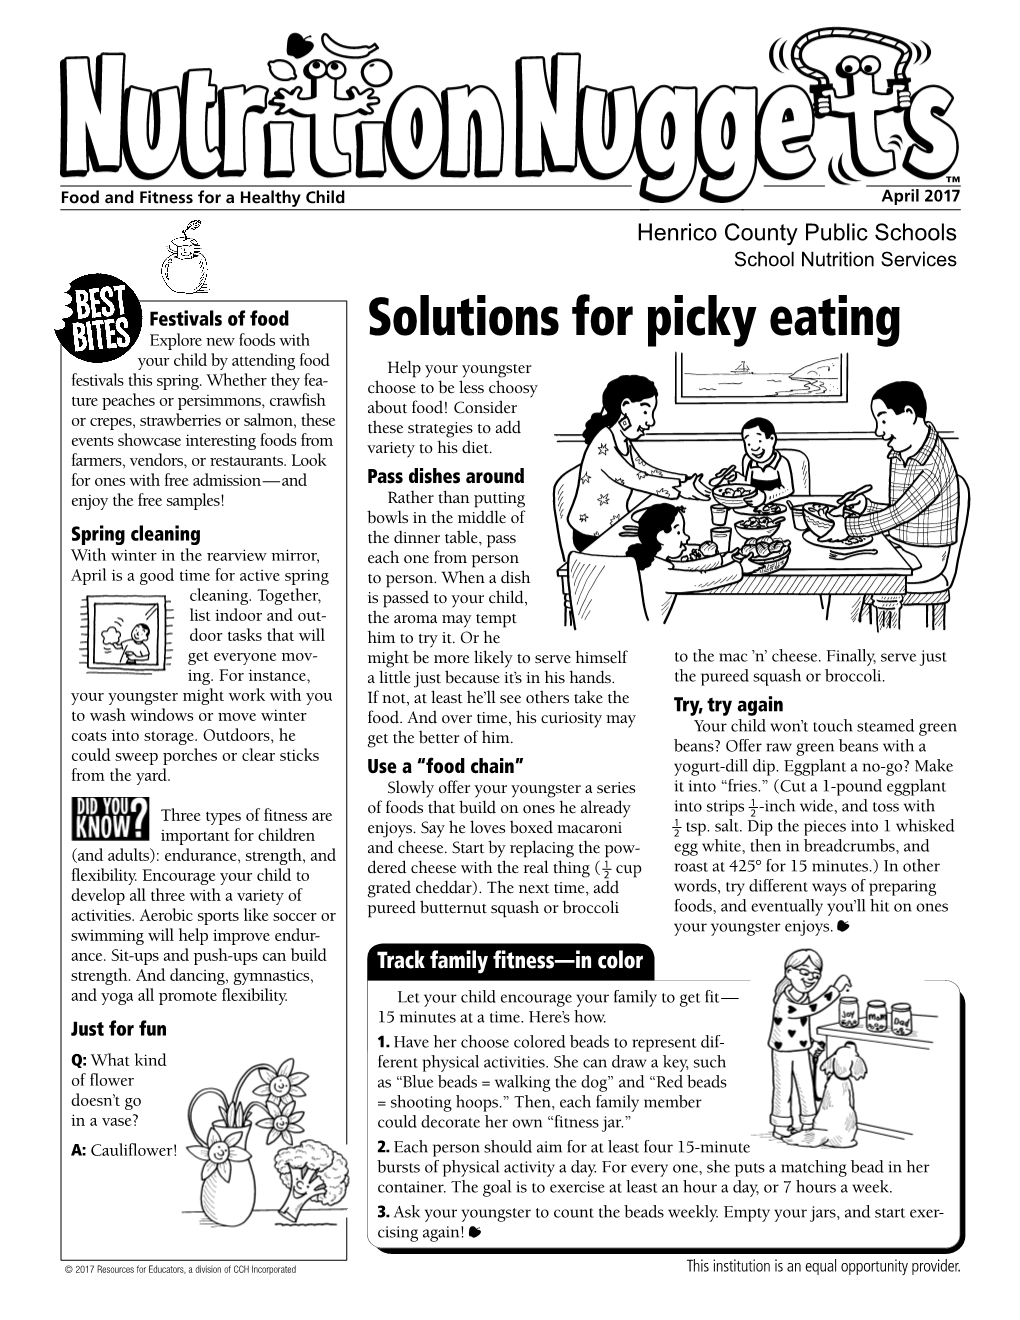 Solutions for Picky Eating Your Child by Attending Food Help Your Youngster Festivals This Spring